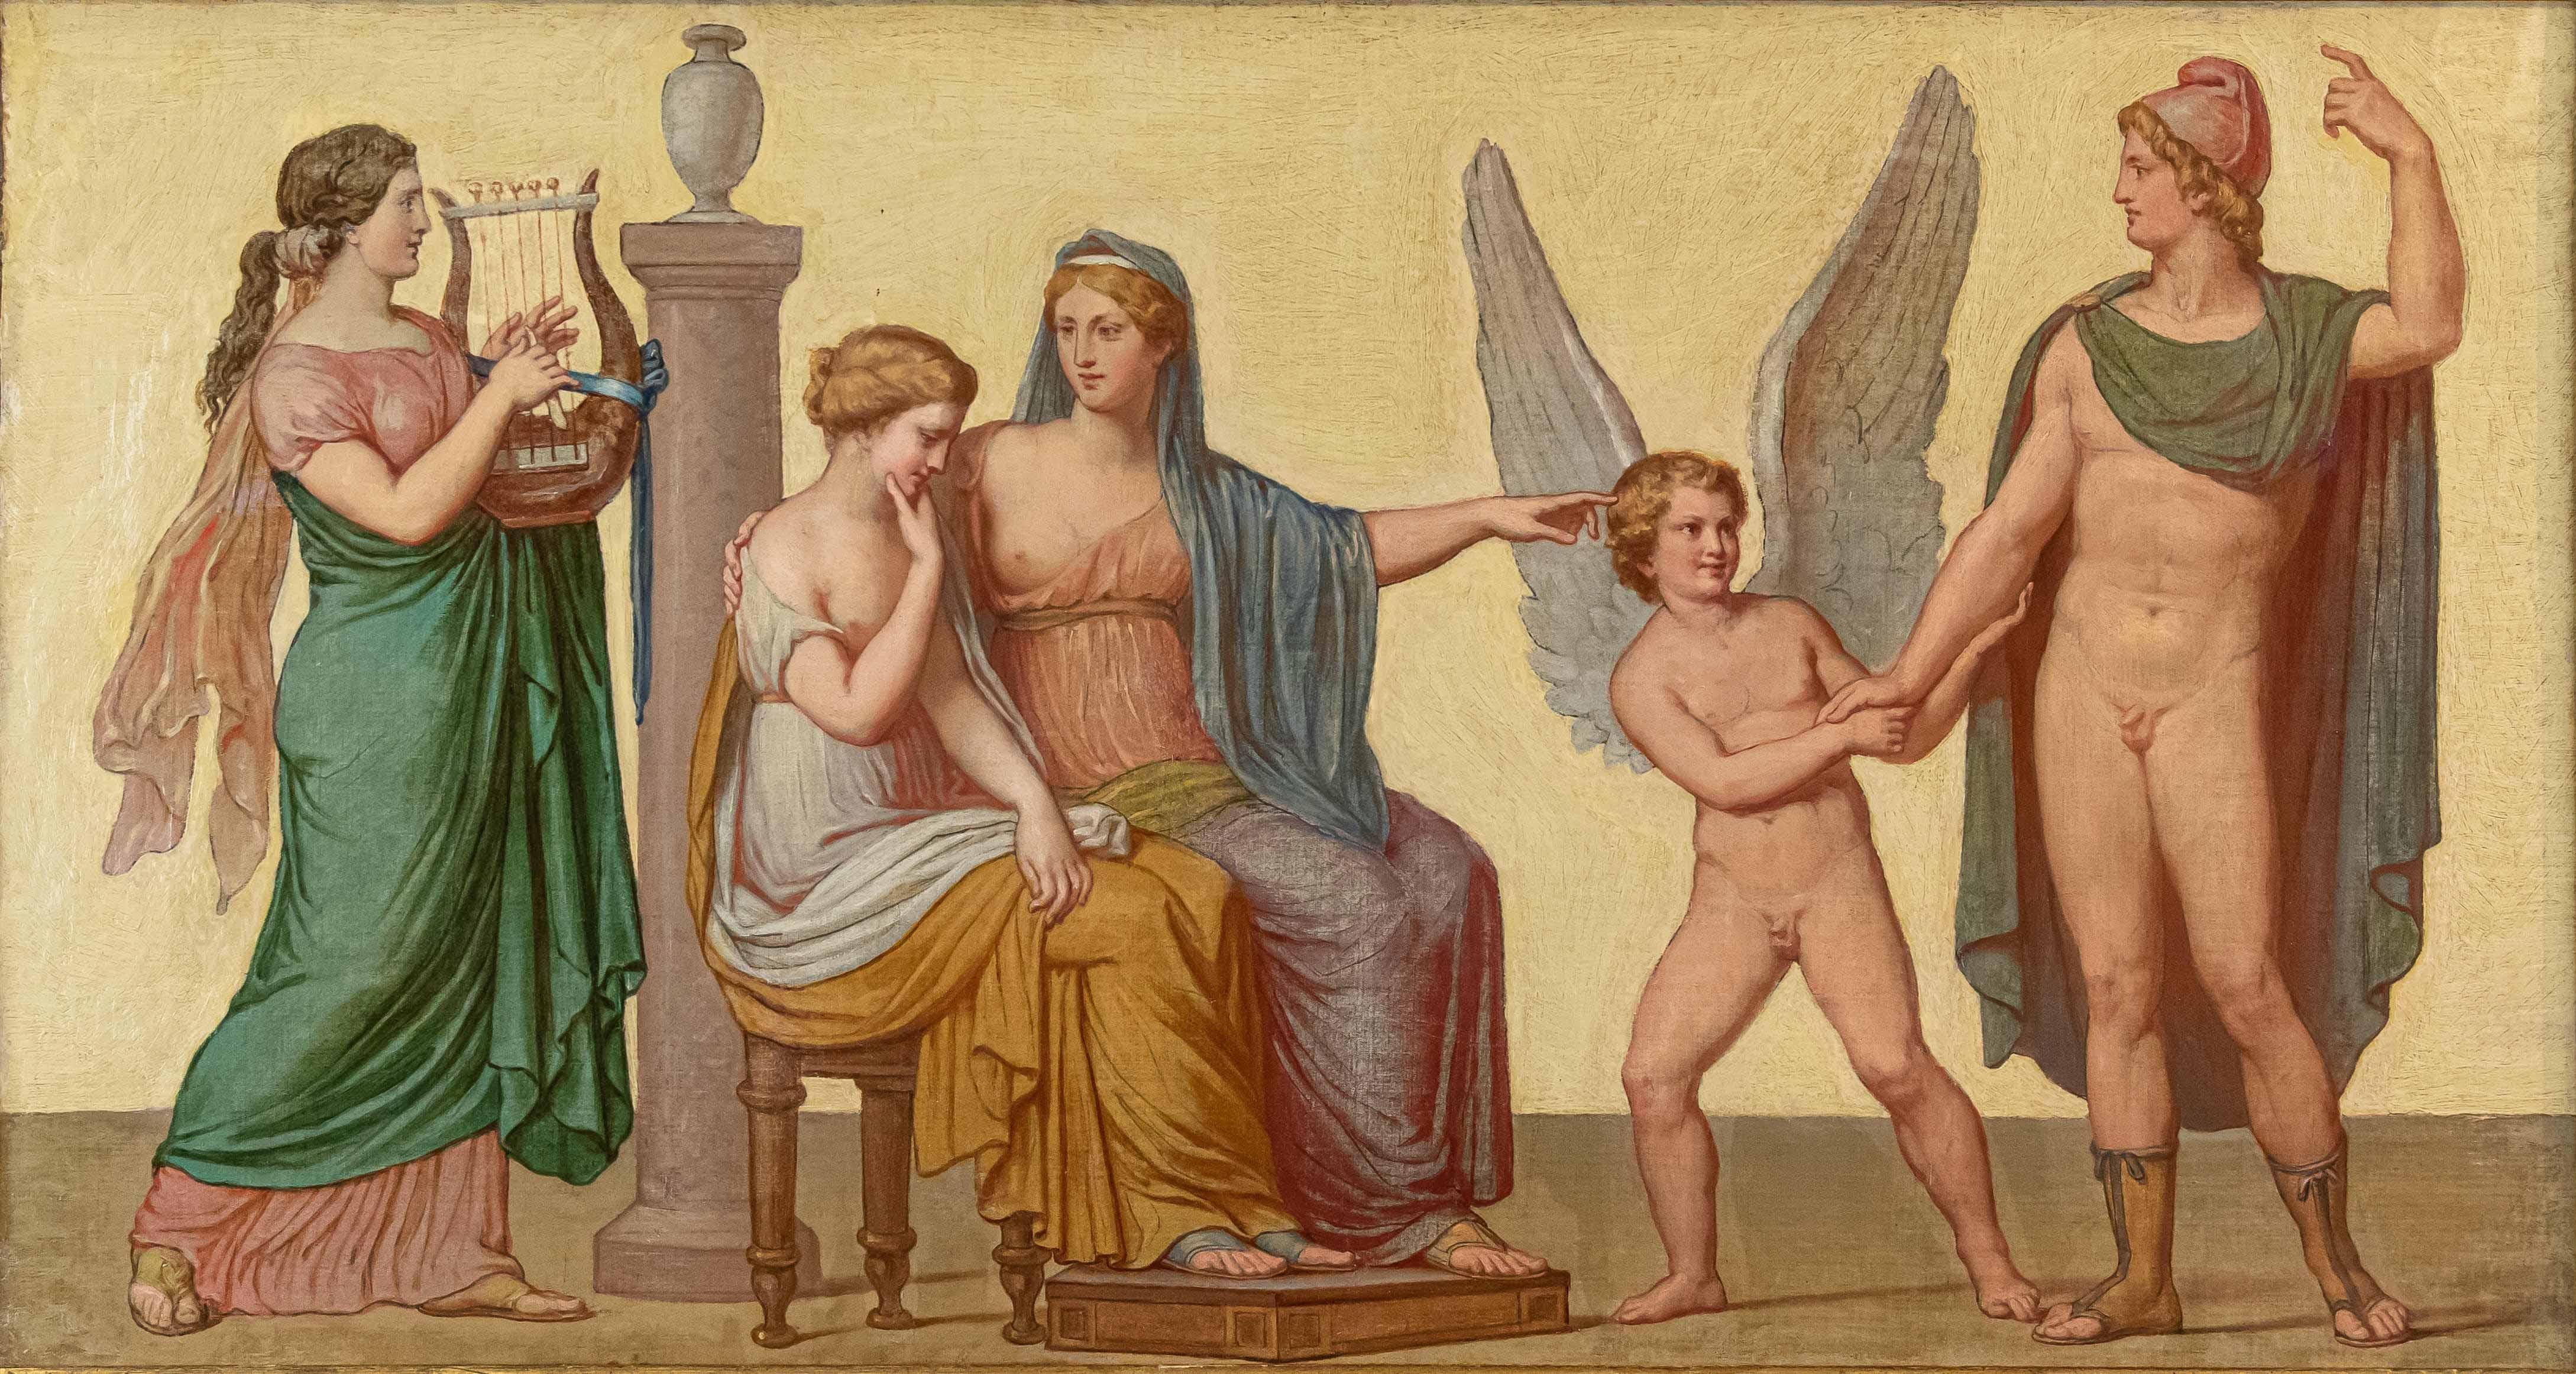 Neoclassical artist, 19th century
Apollo in the company of Cupid and the Muses
Oil on canvas, 57.5 x 104 cm
Signed at the bottom 